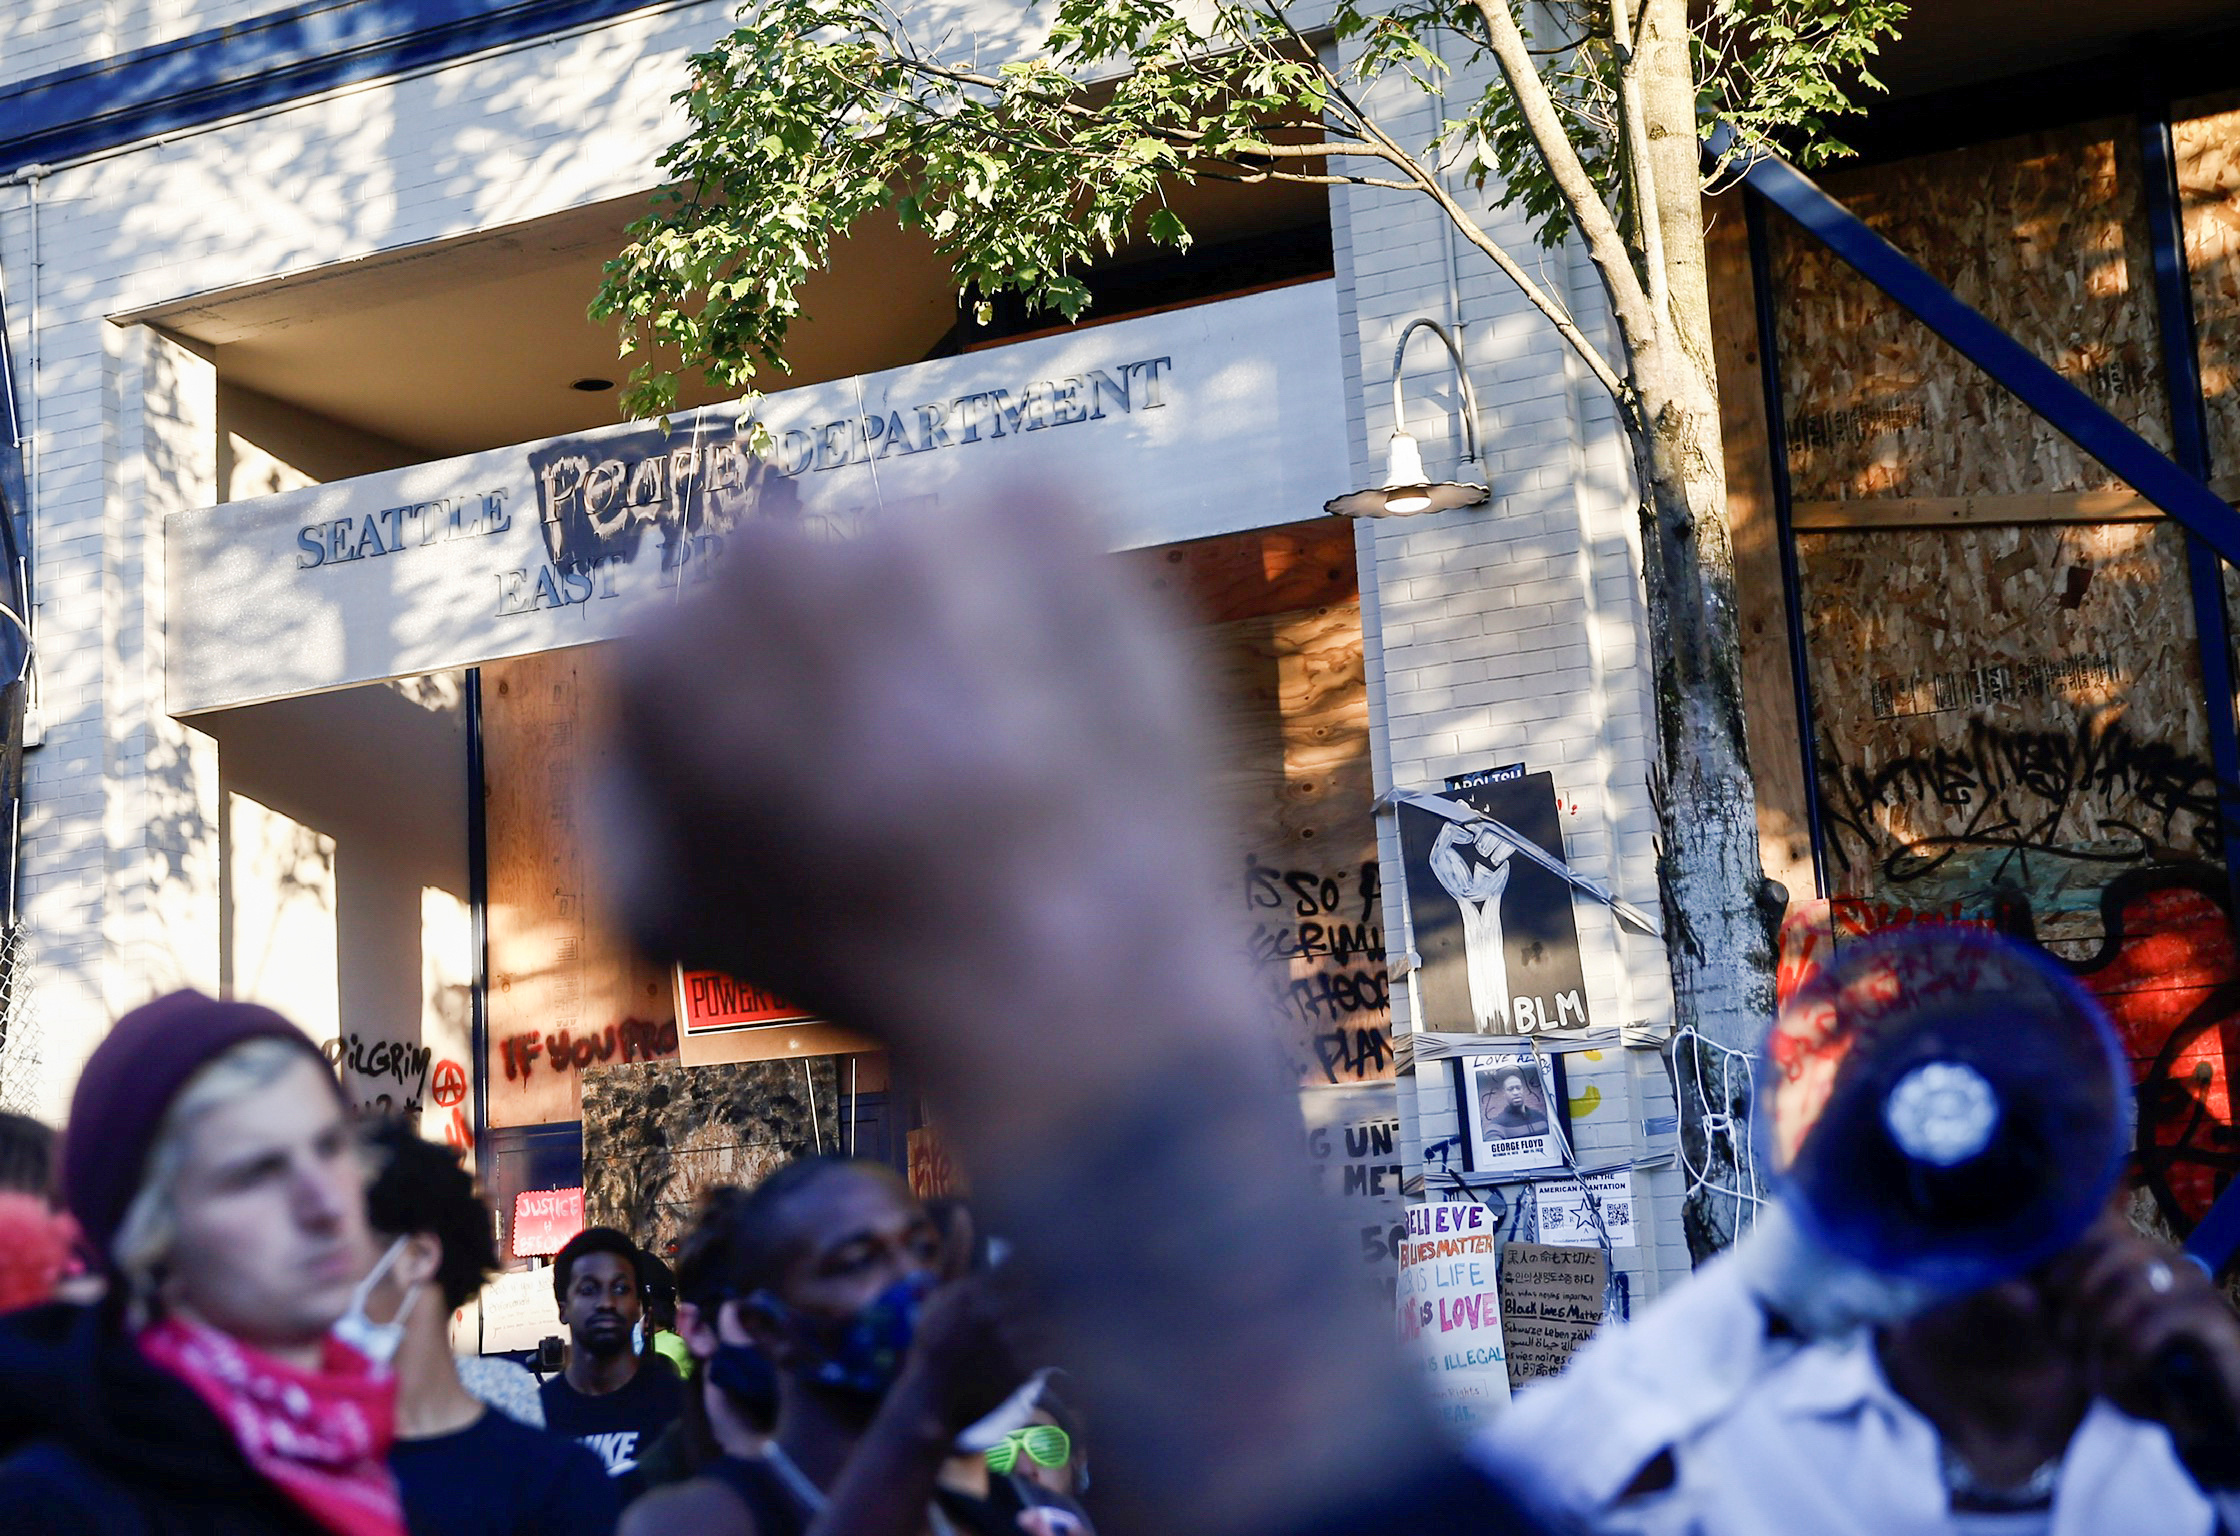 PHOTO: A protester raises a fist as others discuss strategies outside the Seattle Police Department's East Precinct within the boundaries of the so-called Capitol Hill Organized Protest zone, or CHOP, in Seattle, Washington, on June 22, 2020.